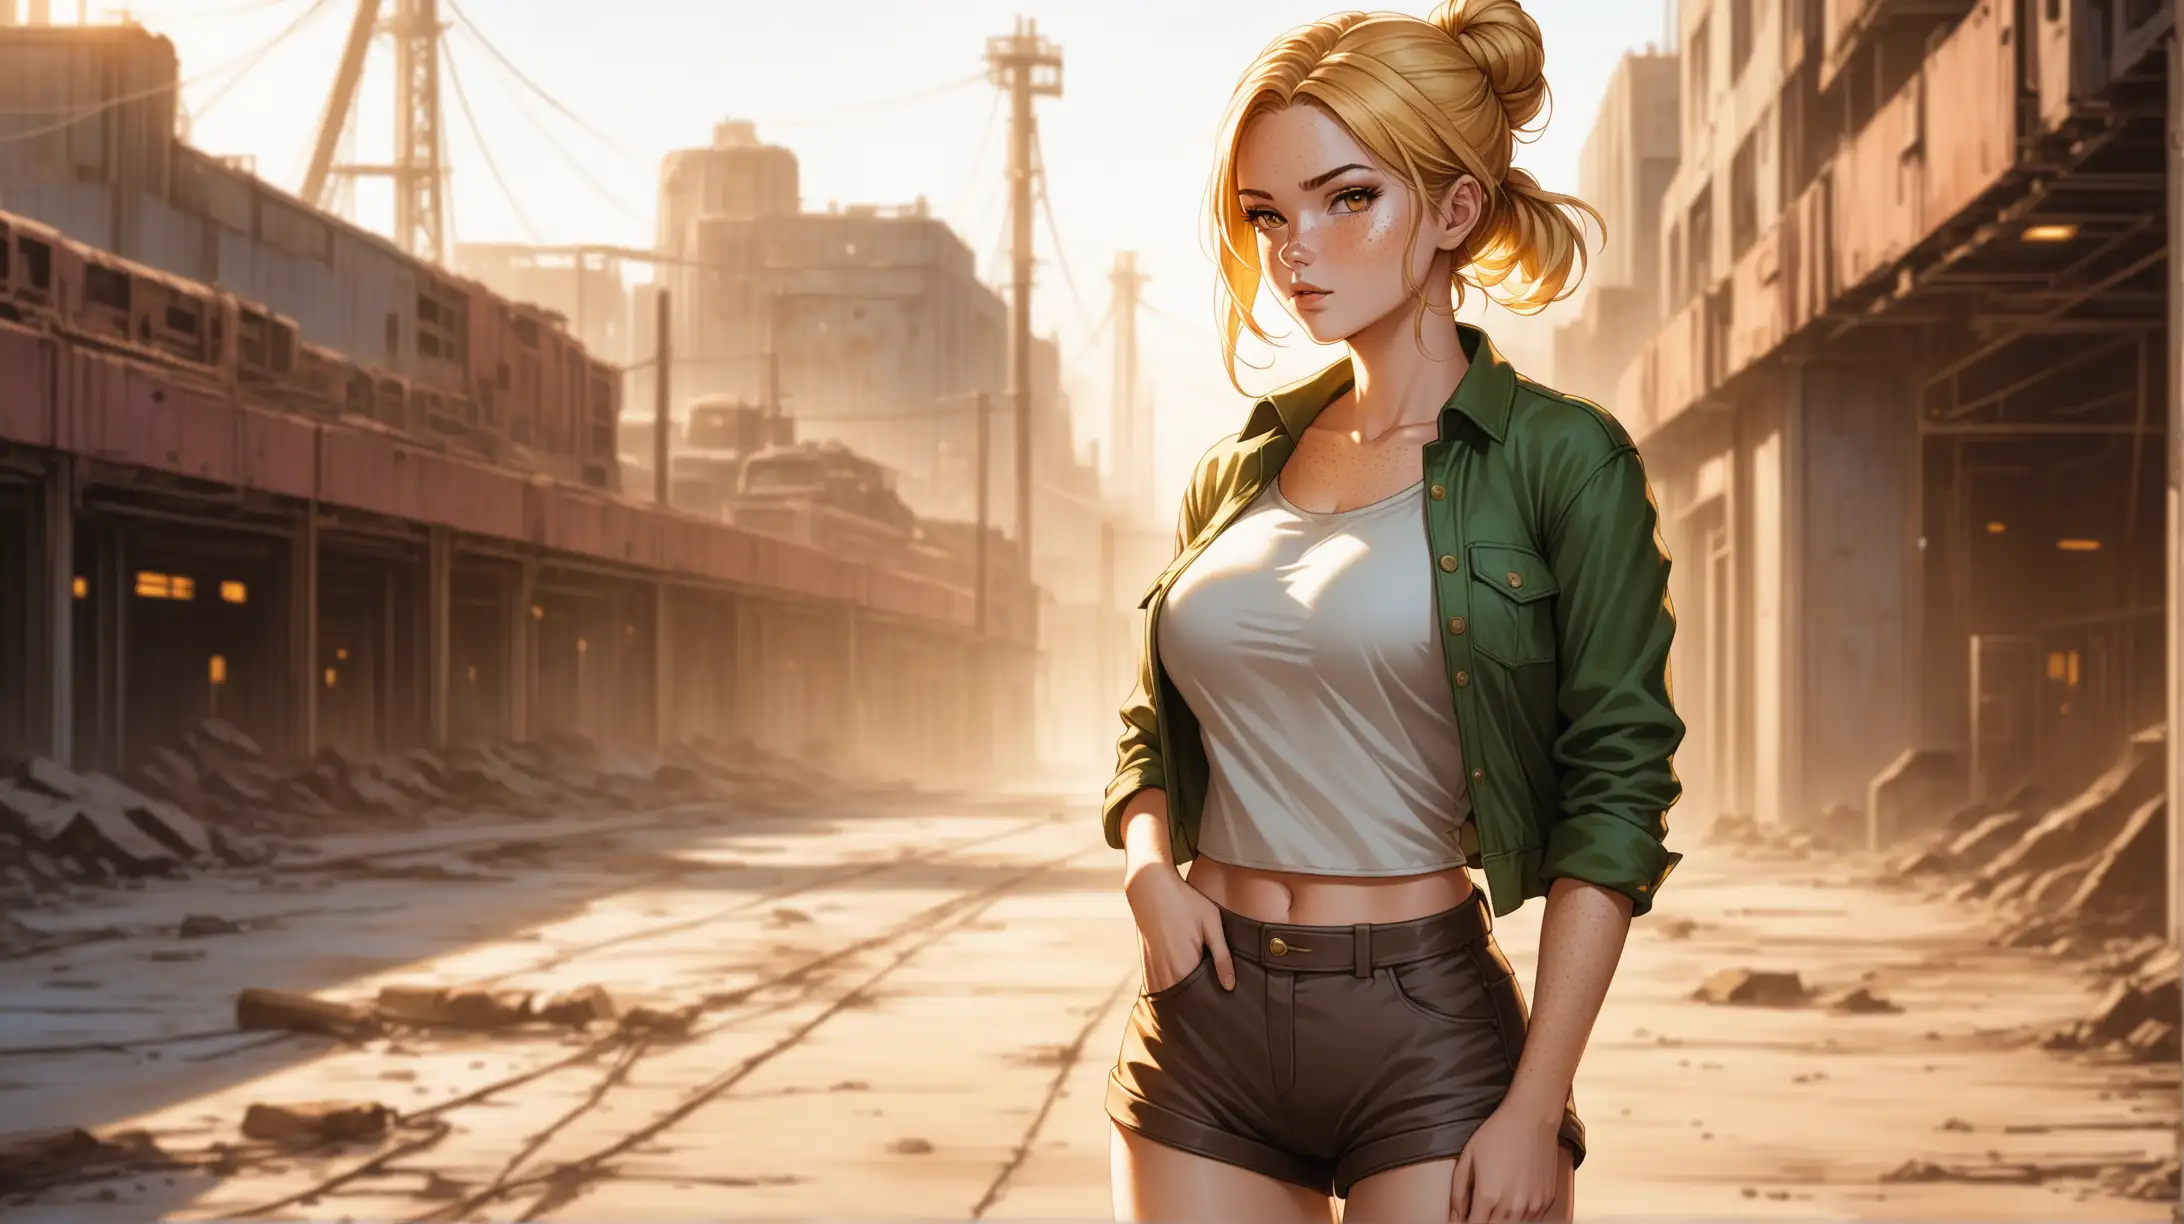 Draw a woman, long blonde hair in a bun, gold eyes, freckles, perky figure, shorts and shirt inspired from the Fallout series, high quality, cowboy shot, outdoors, urban setting, seductive pose, natural lighting, loving gaze toward the viewer